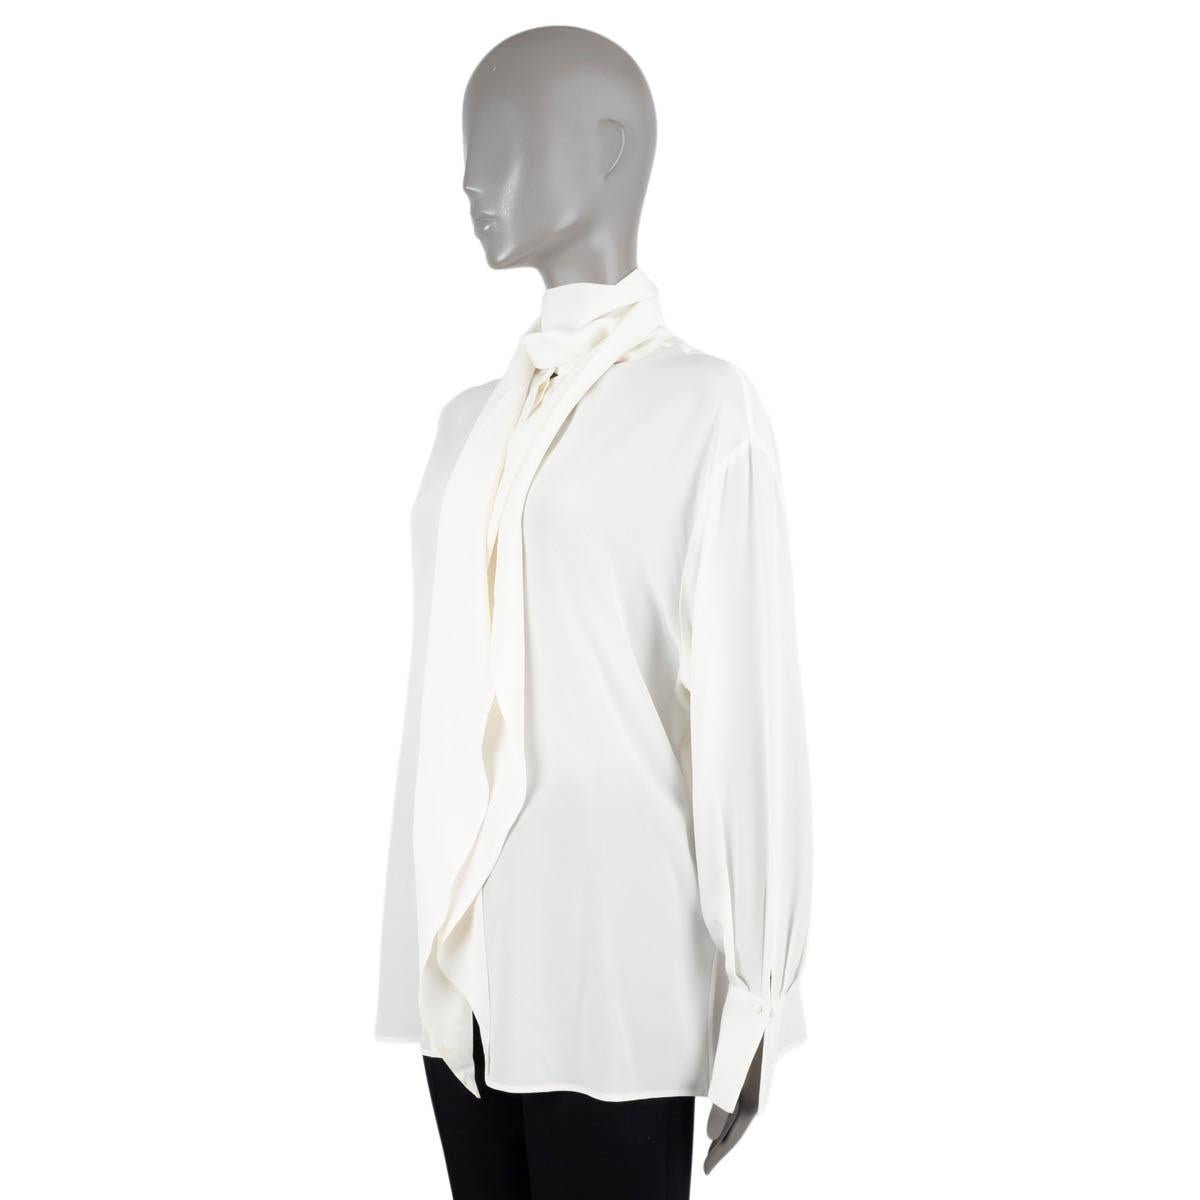 ETRO ivory silk SANTA BARBARA DRAPED PUSSY BOW Blouse Shirt 44 L In Excellent Condition For Sale In Zürich, CH